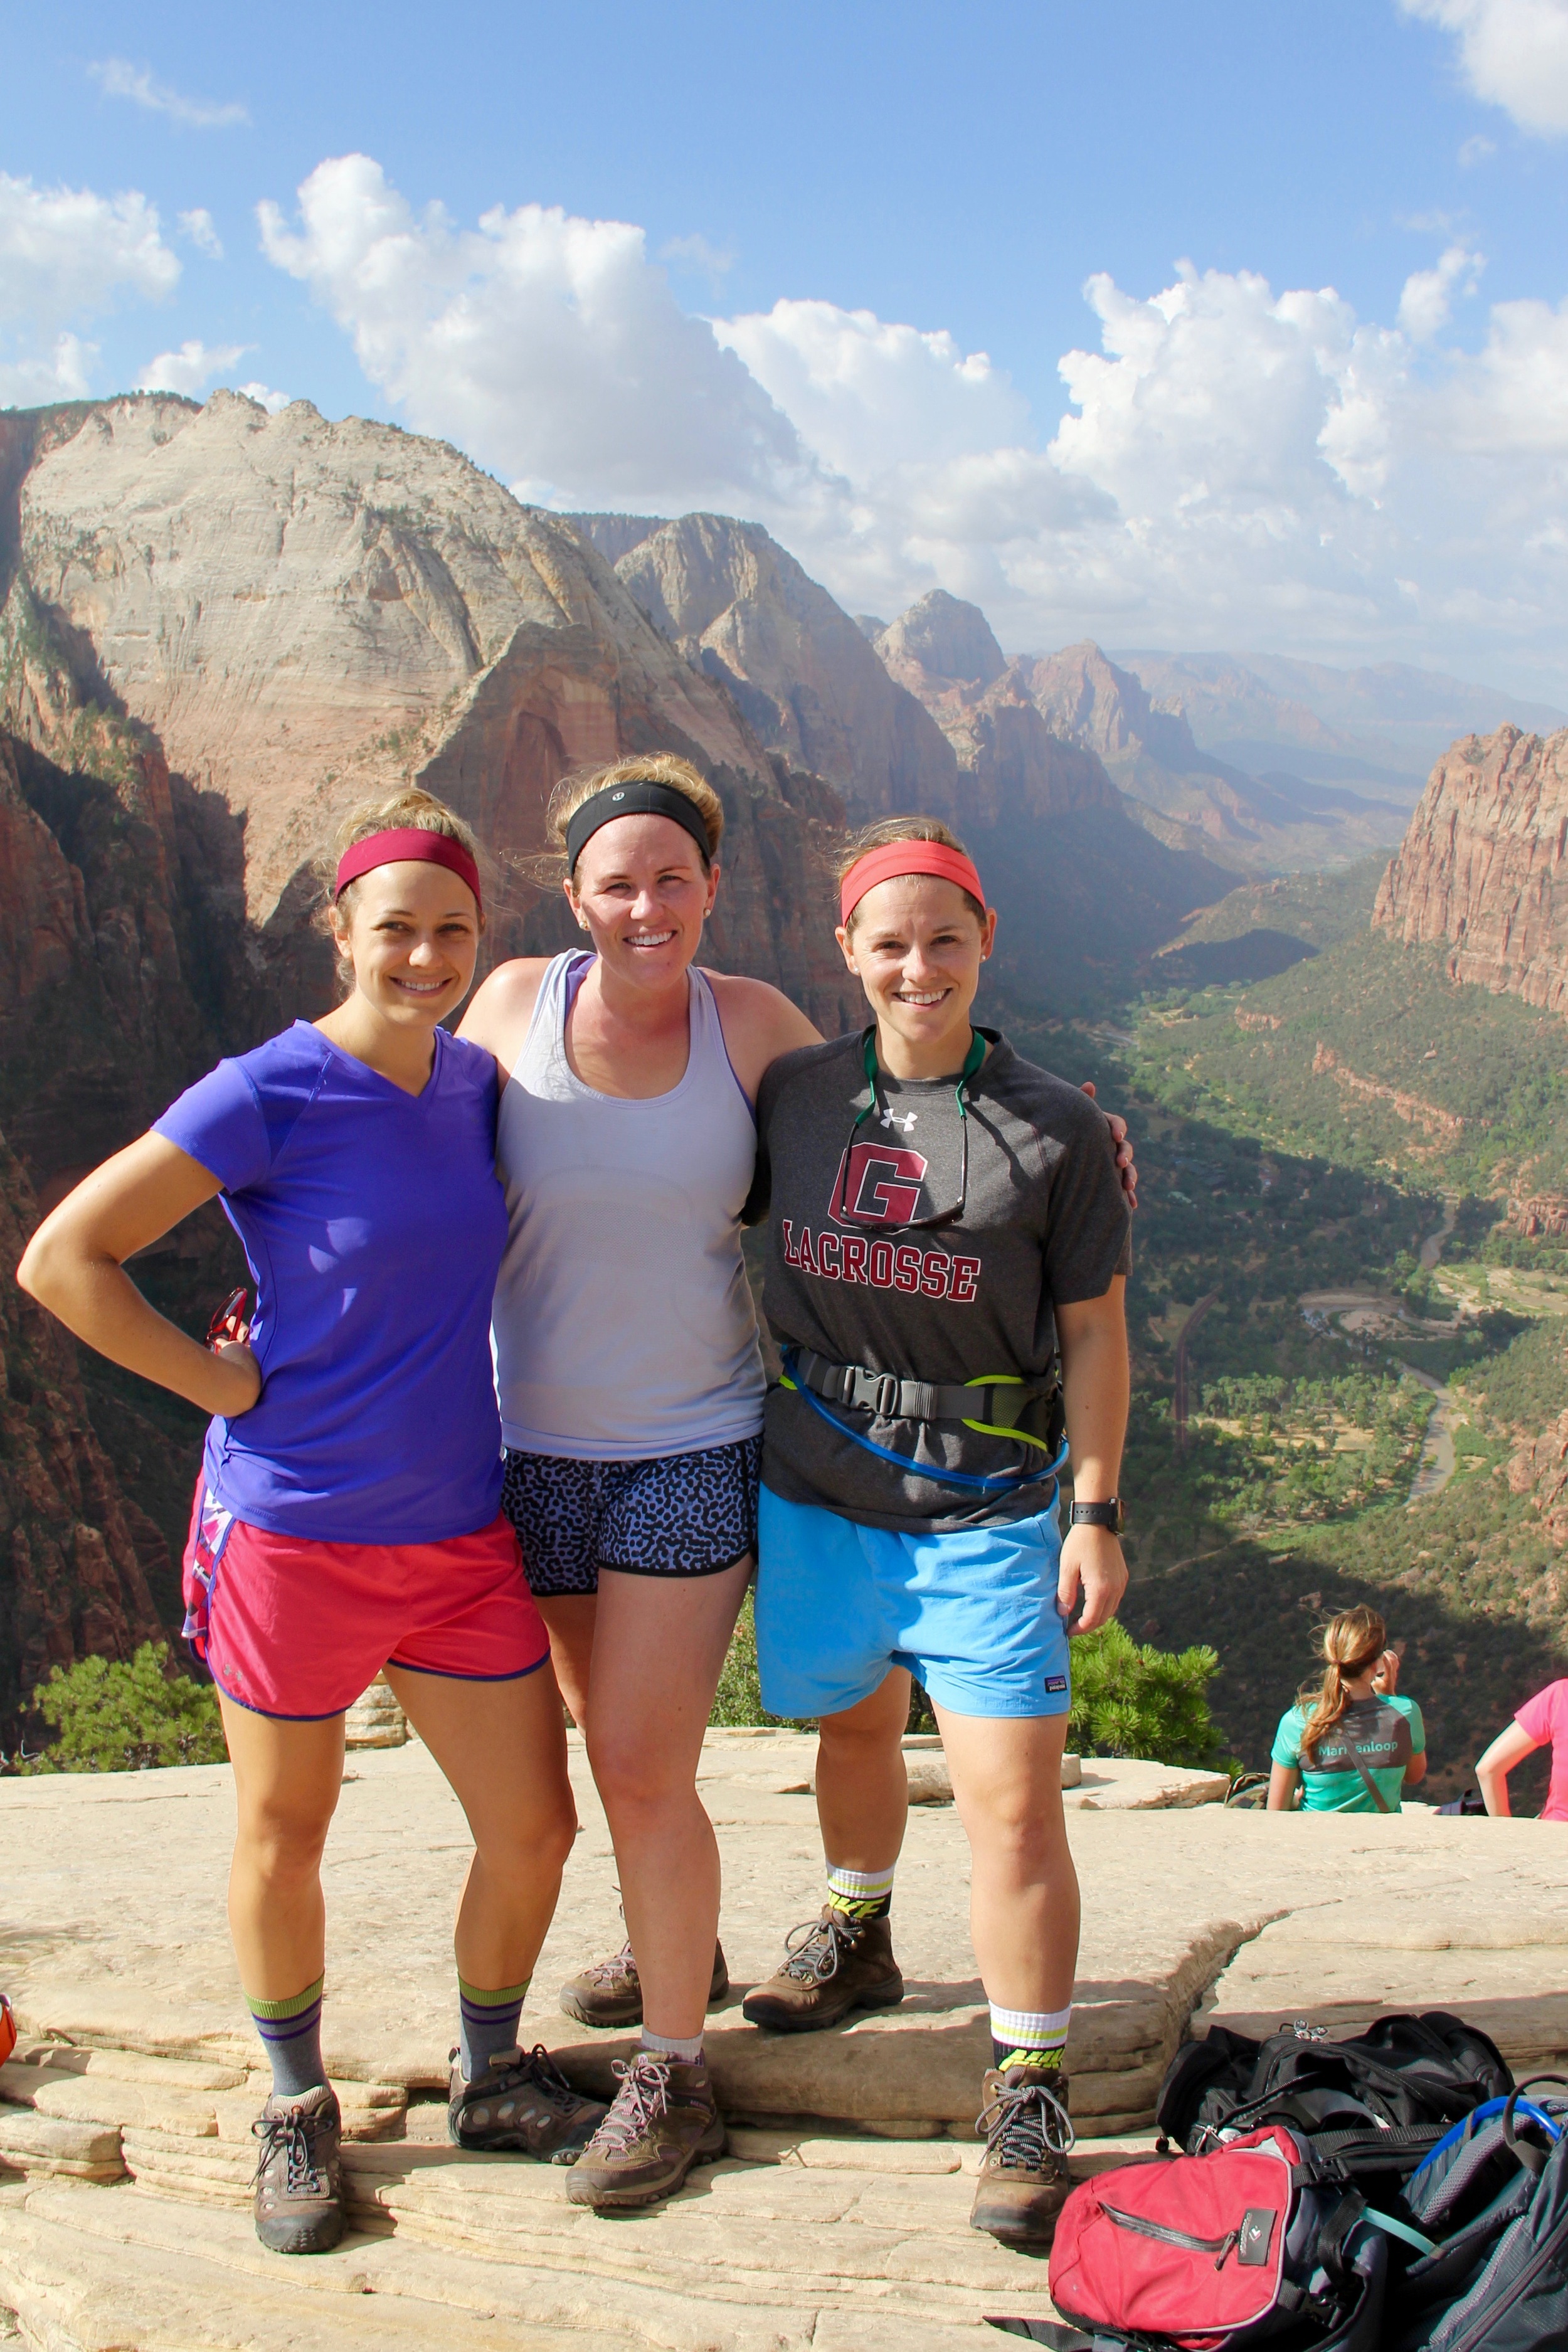  A wide stance at the top of Angel's Landing to make sure we don't fall off.  